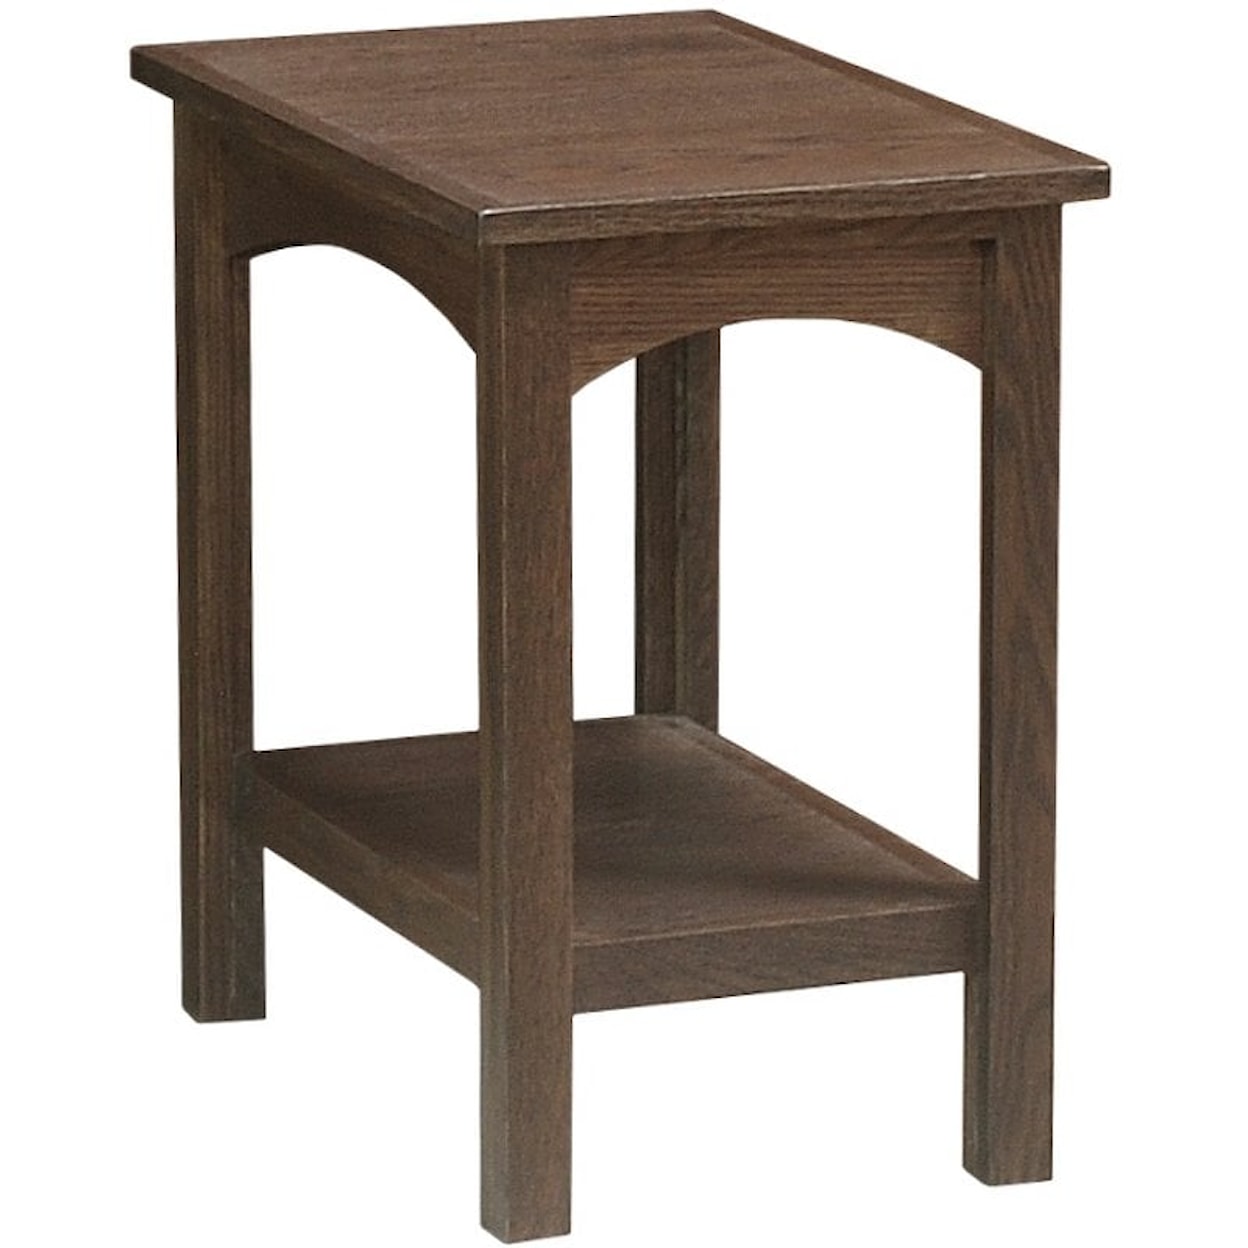 Wolfcraft McMillan Chairside Table